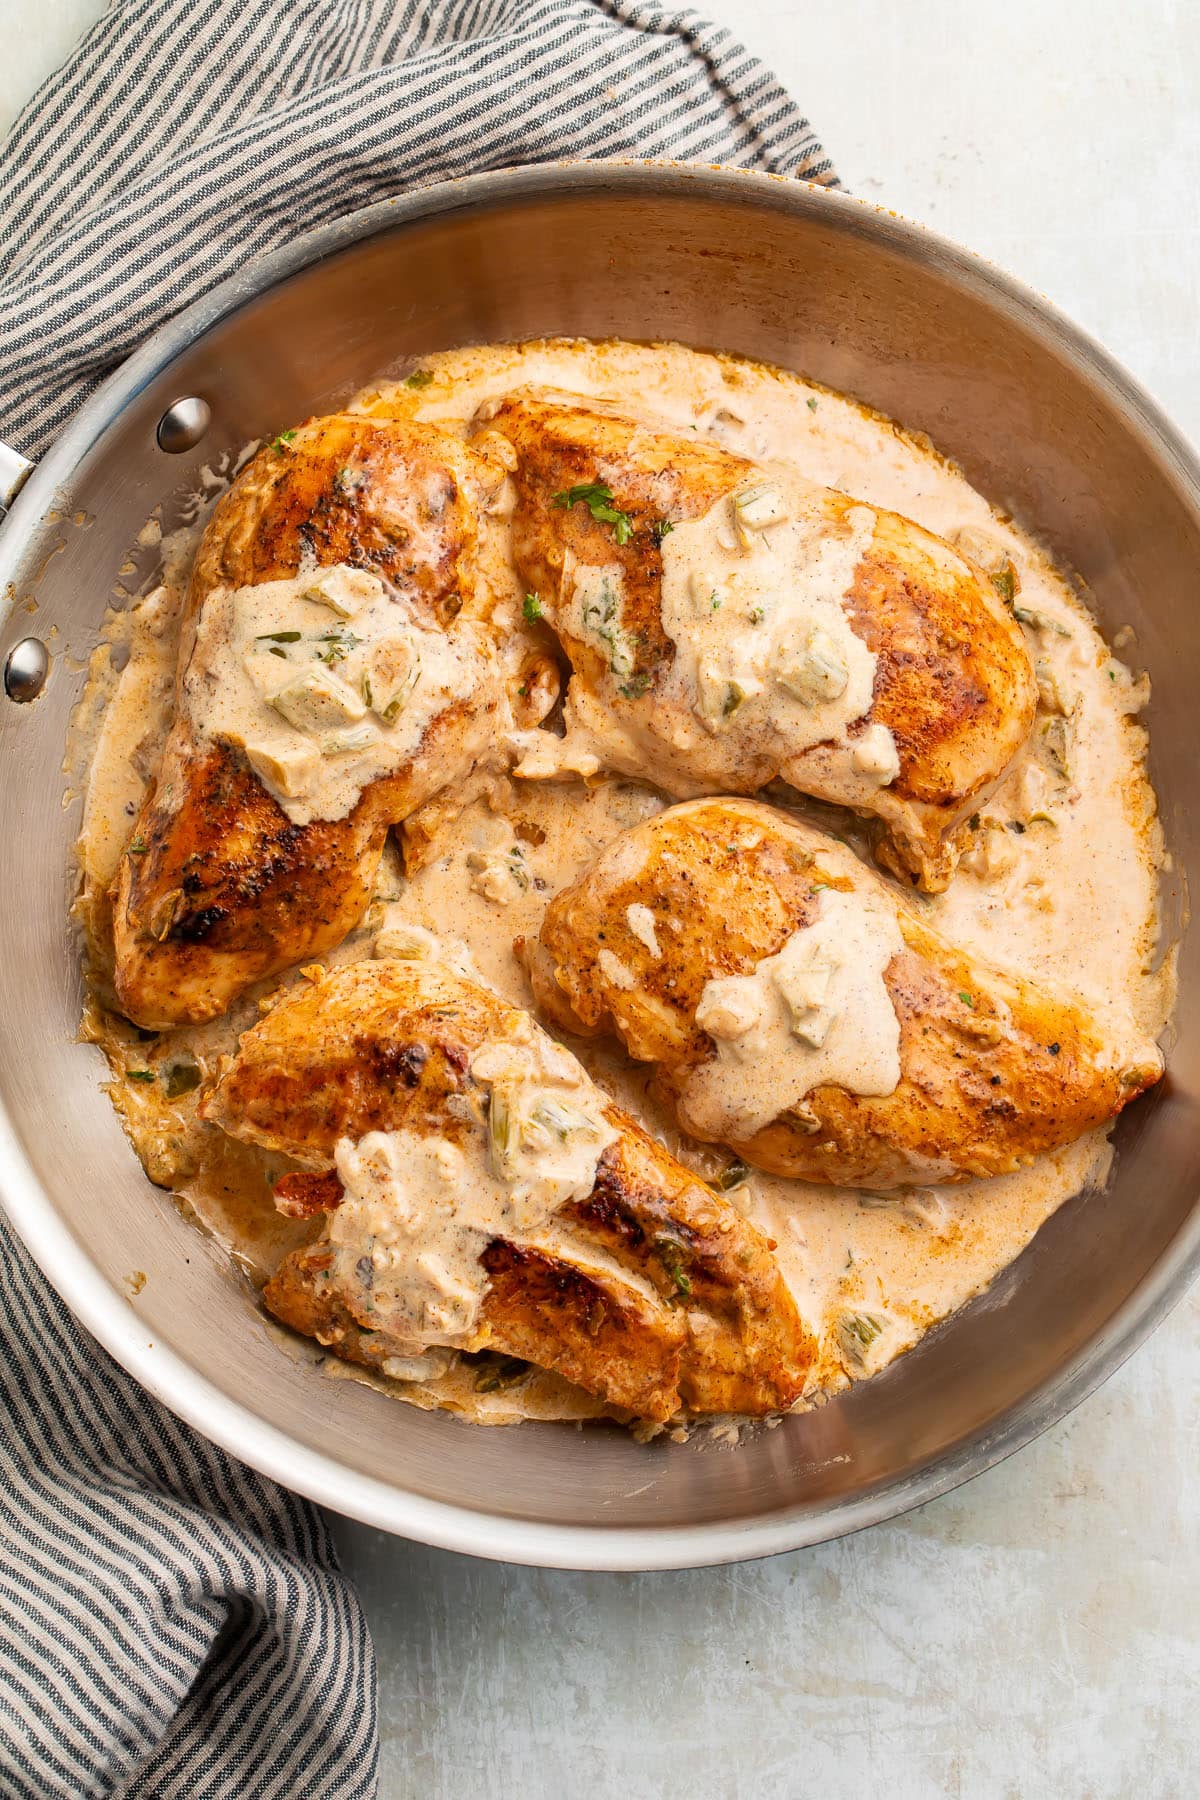 Four seared Cajun-seasoned chicken breasts topped with a creamy sauce in a large silver skillet.